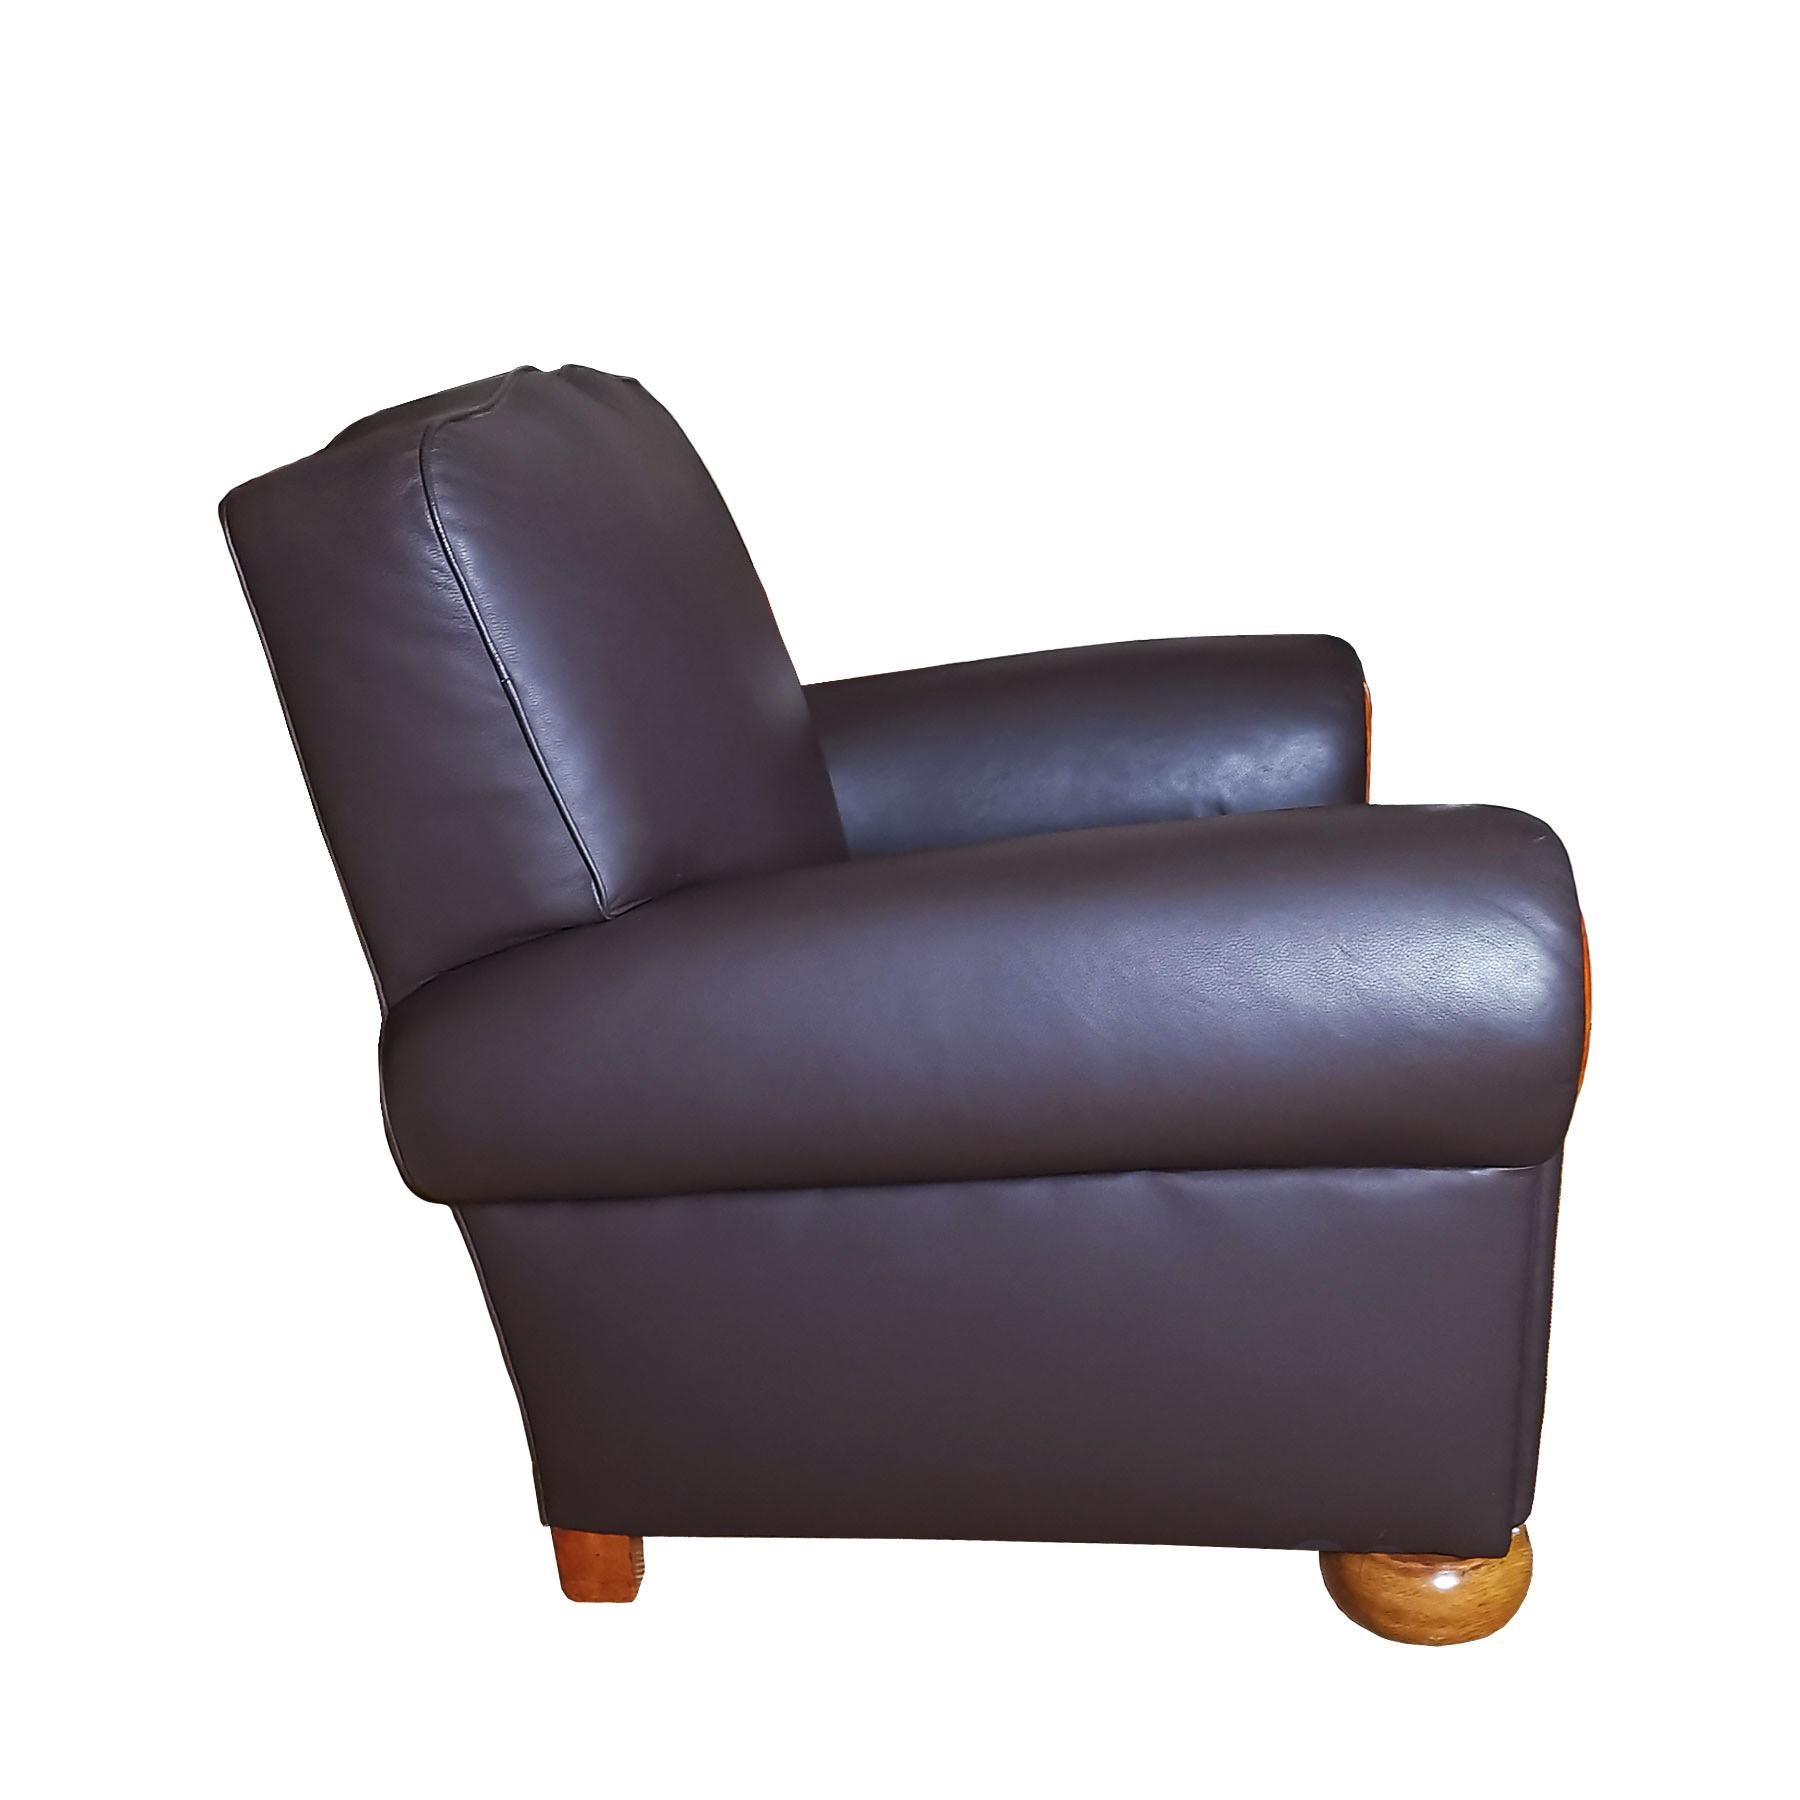 Big Mid-Century Modern Club Armchair, Wood and Chocolate Leather - Belgium In Good Condition For Sale In Girona, ES